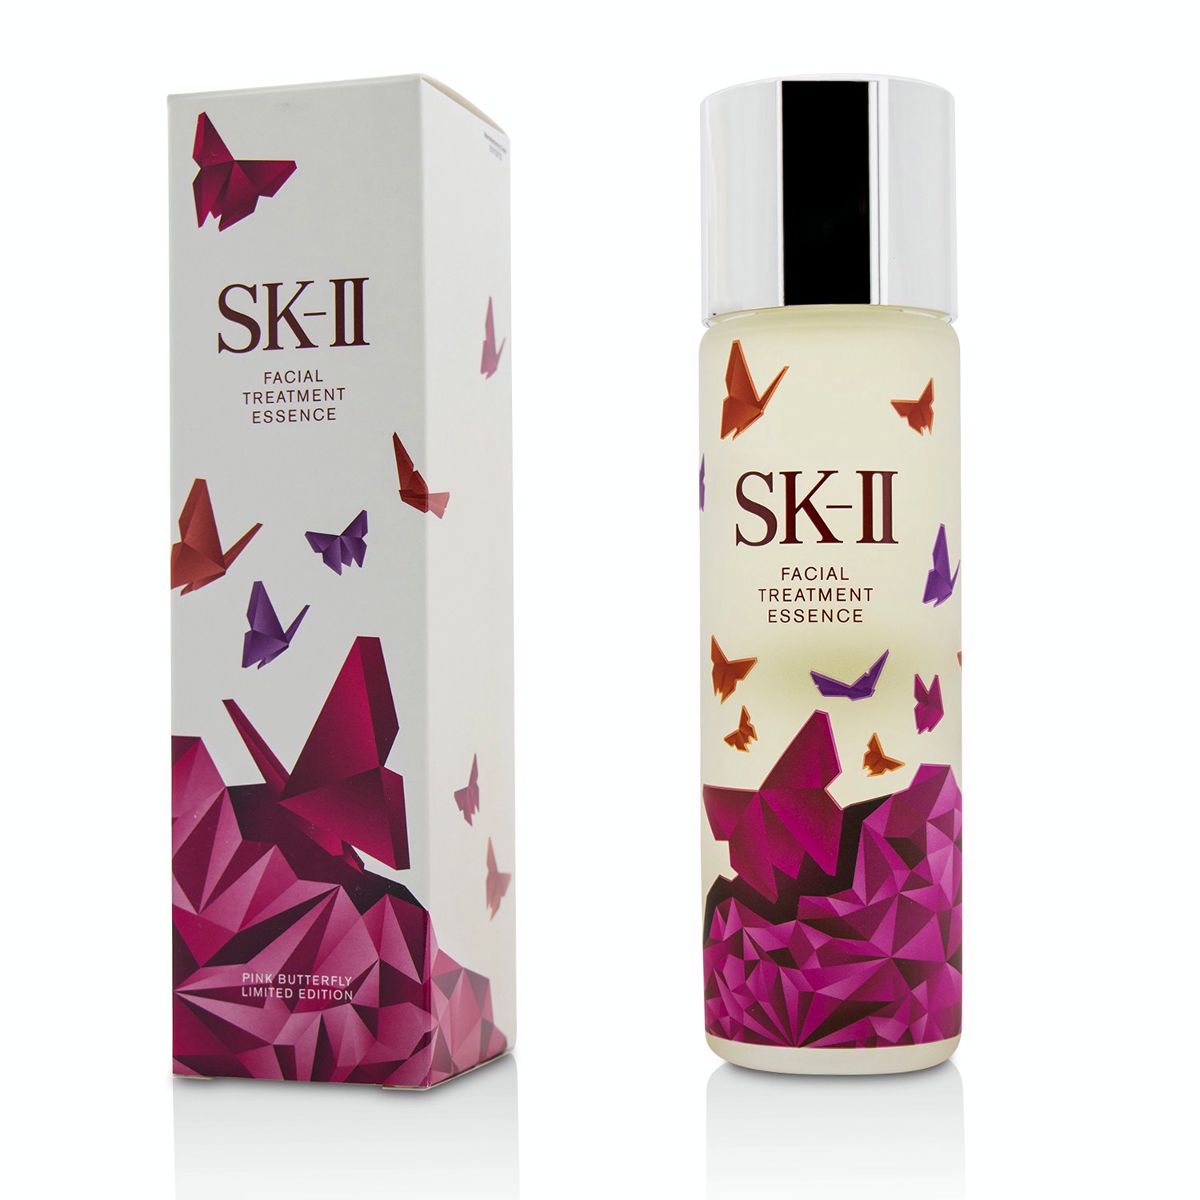 Facial Treatment Essence (Pink Butterfly Limited Edition) SK II Image